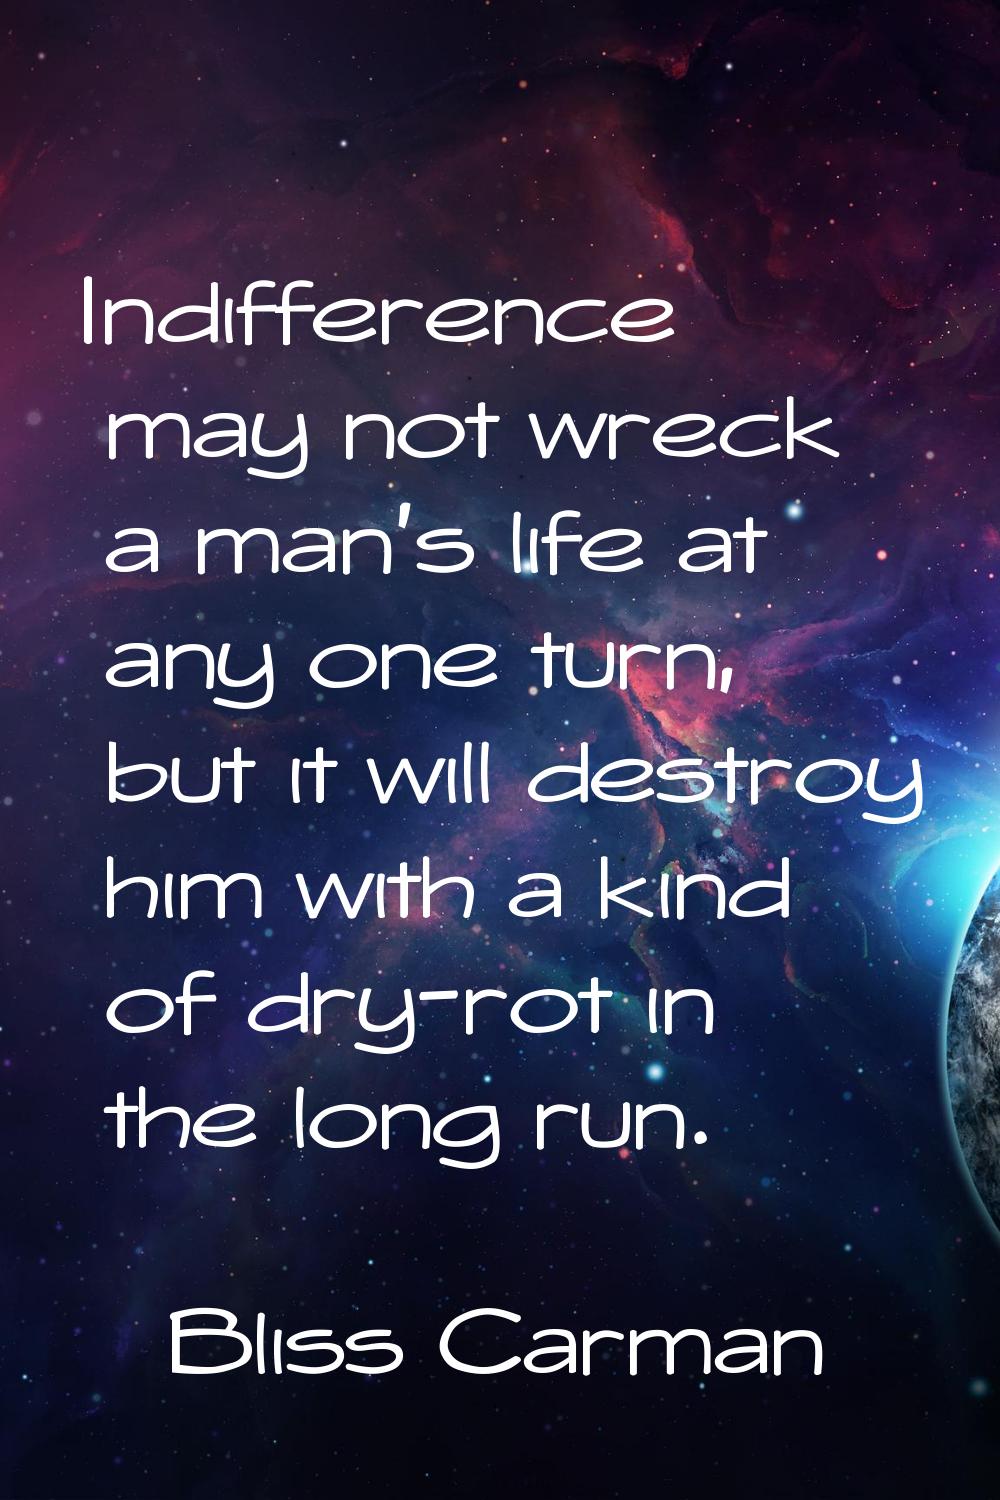 Indifference may not wreck a man's life at any one turn, but it will destroy him with a kind of dry